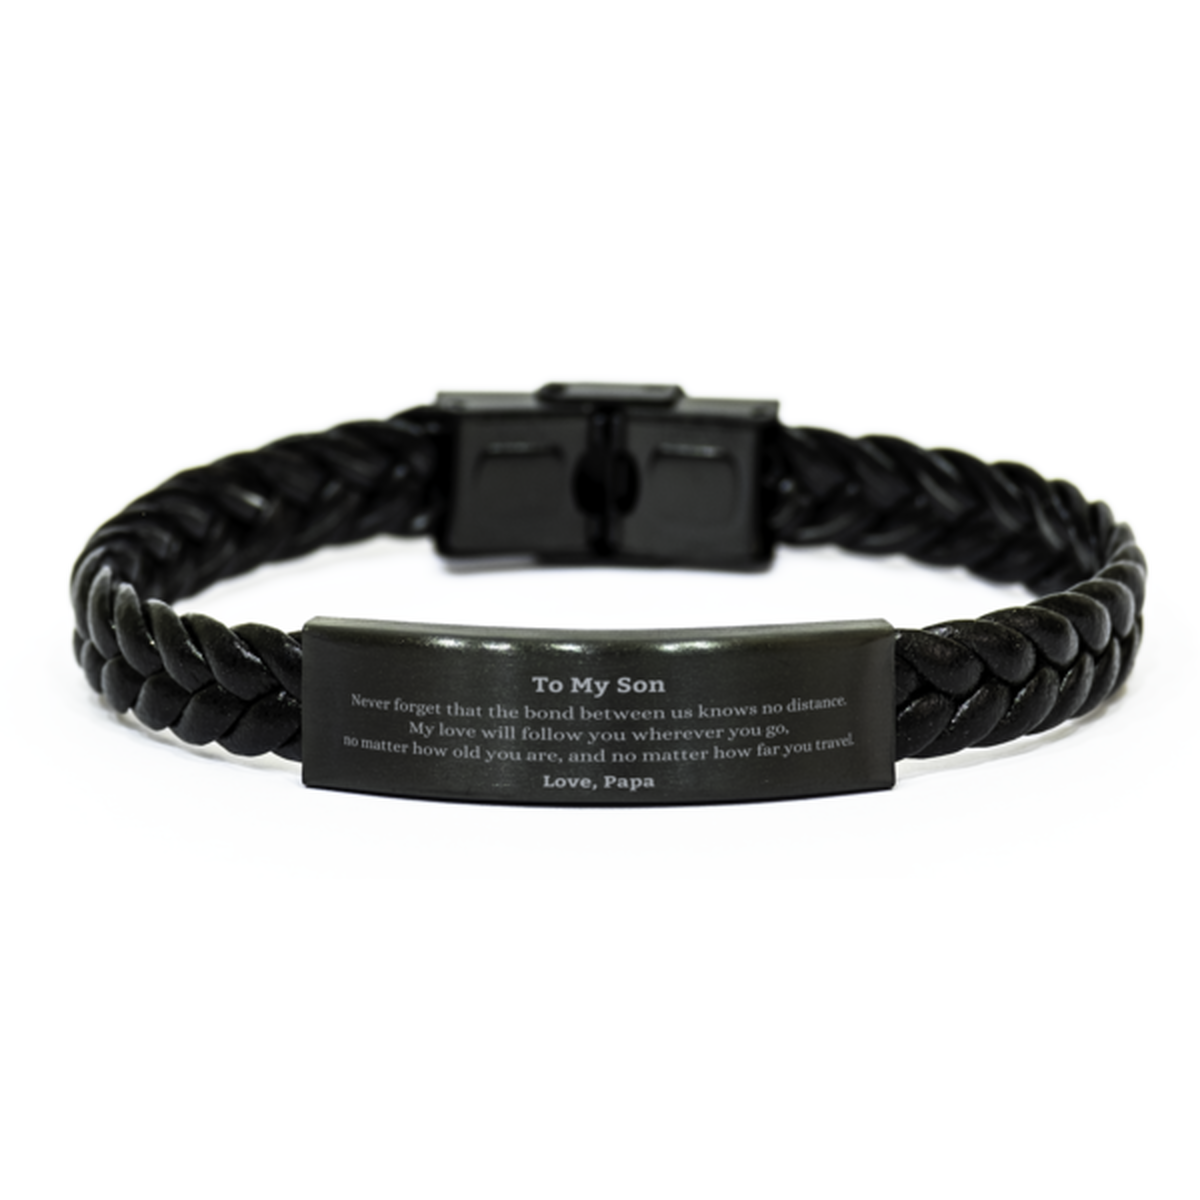 Son Birthday Gifts from Papa, Adjustable Braided Leather Bracelet for Son Christmas Graduation Unique Gifts Son Never forget that the bond between us knows no distance. Love, Papa